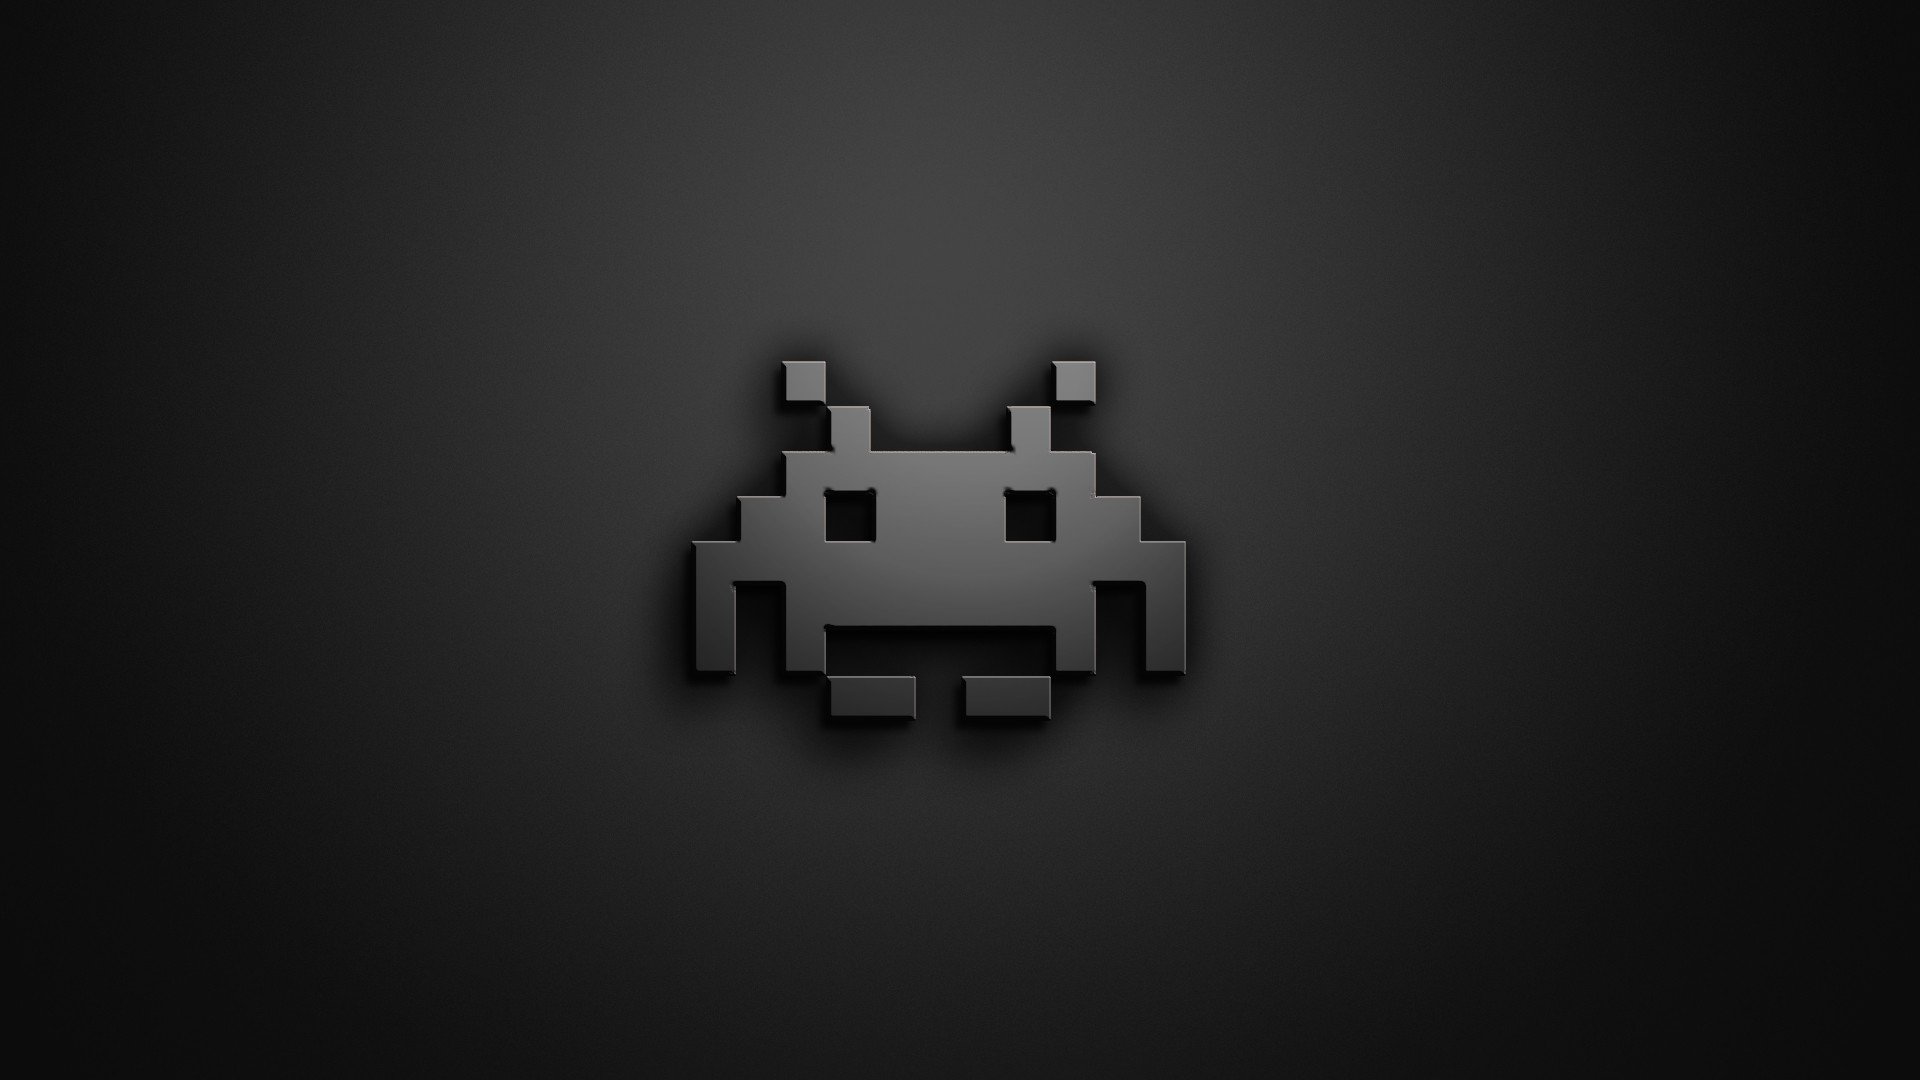 Space Invaders, Retro games, Video games, Monochrome, Simple background